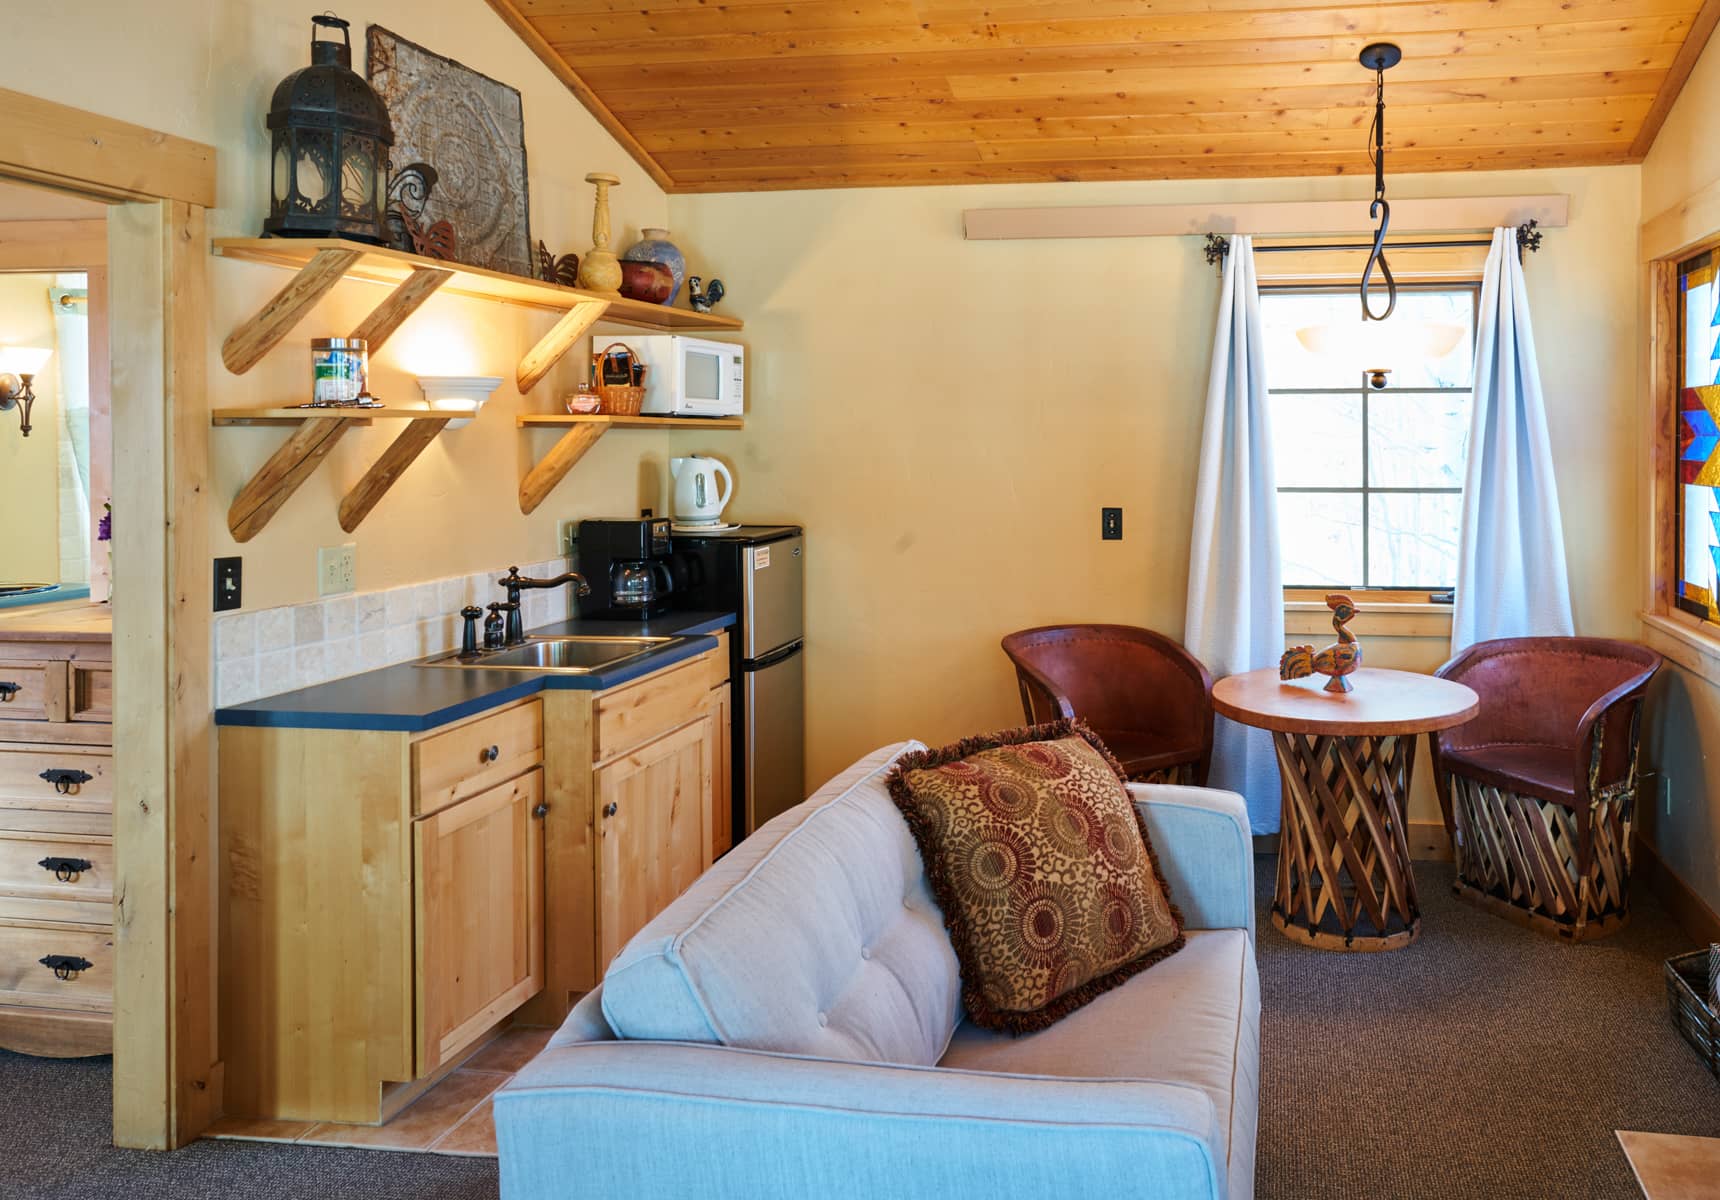 Seating area, kitchenette, and dining table for two in the Mariposa Cabin